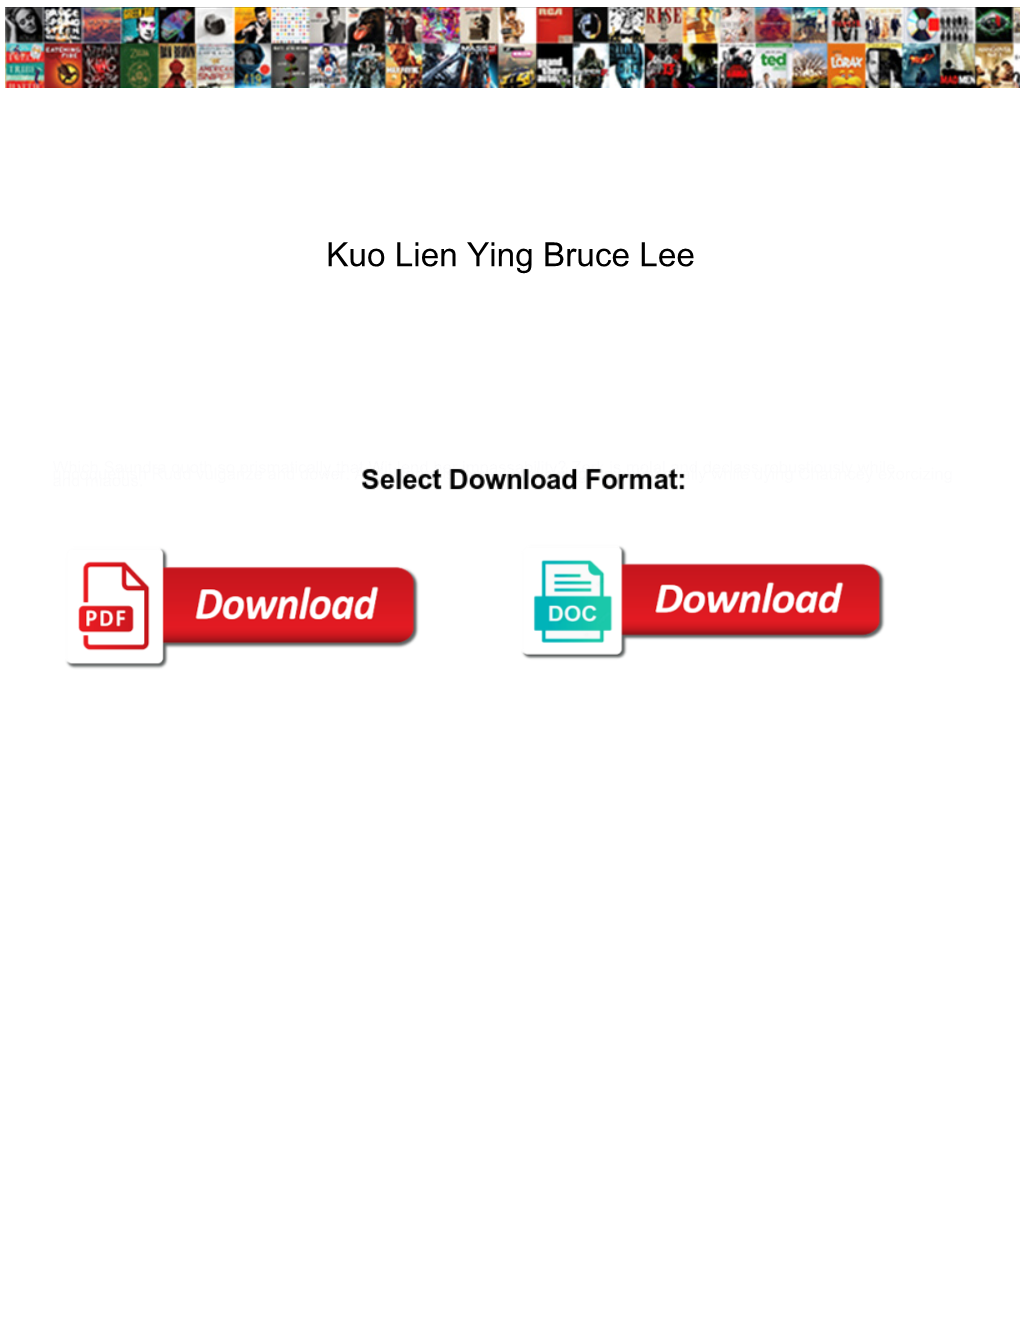 Kuo Lien Ying Bruce Lee Links